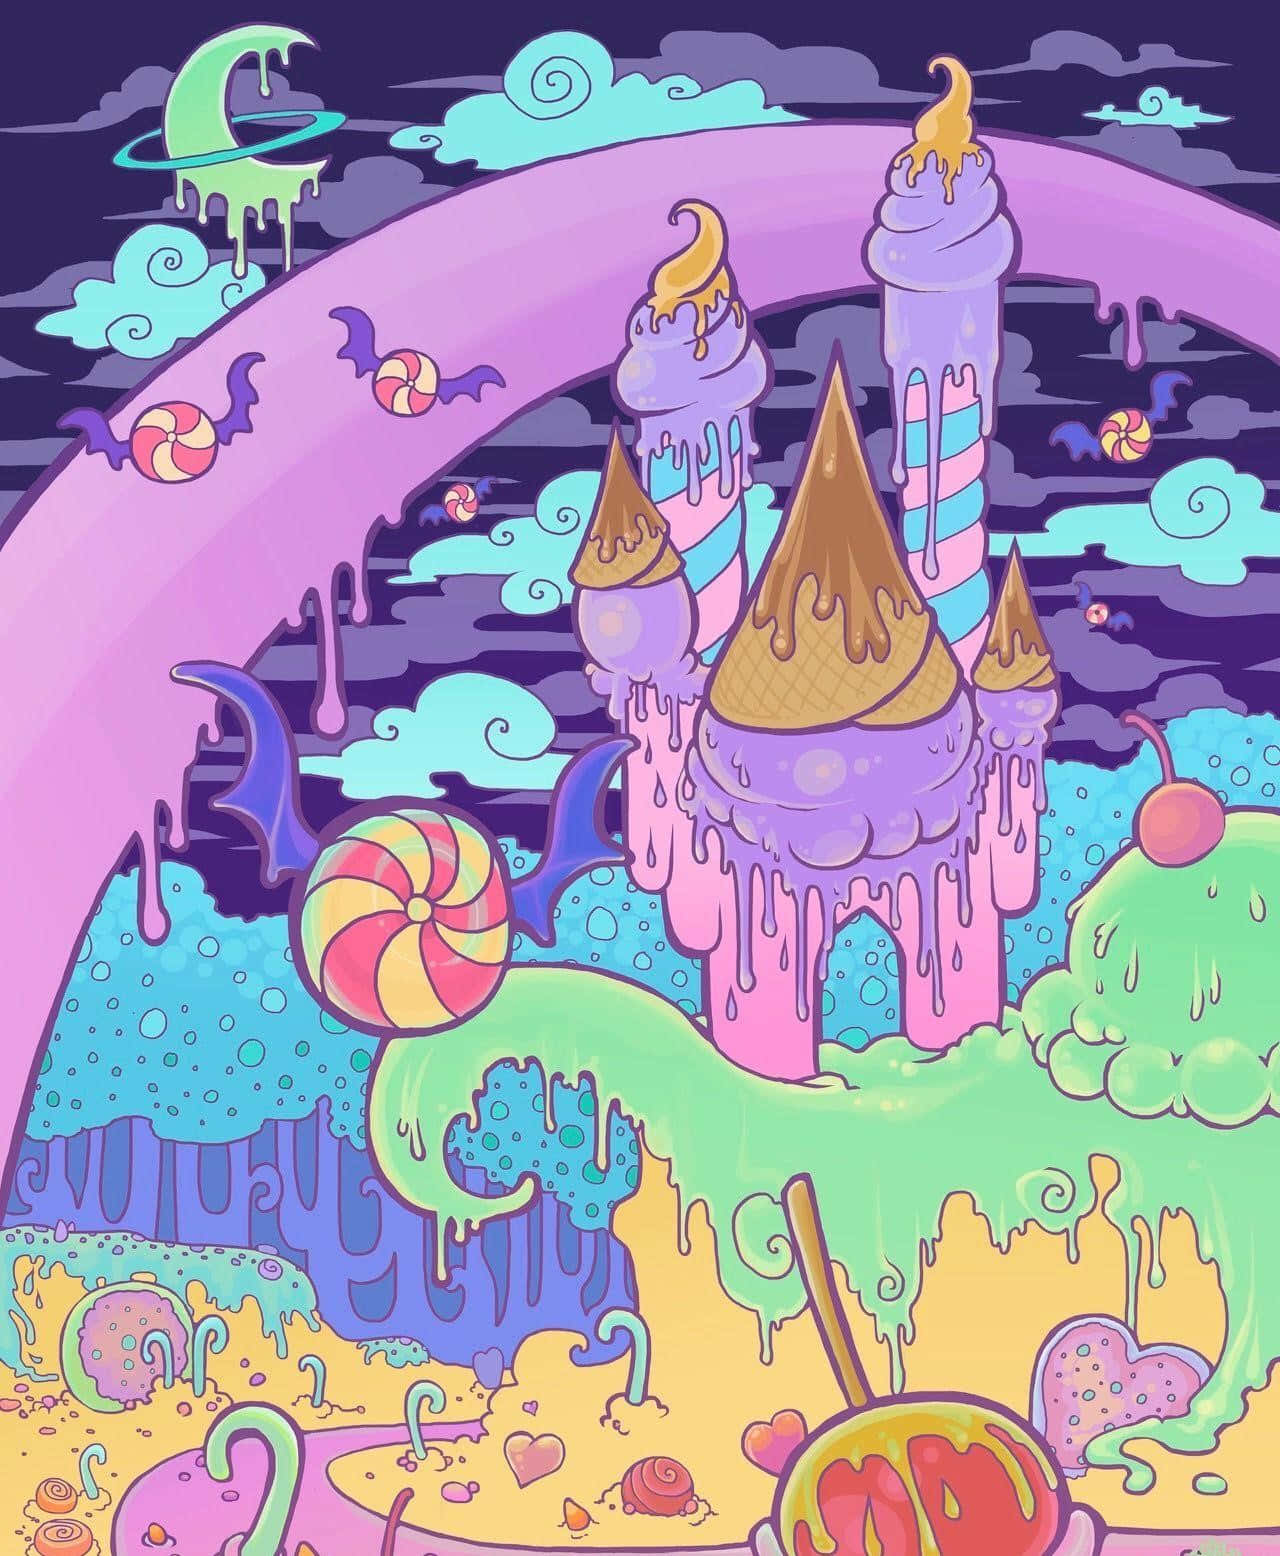 Delicious candy everywhere in the whimsical colorful world of Candy Land